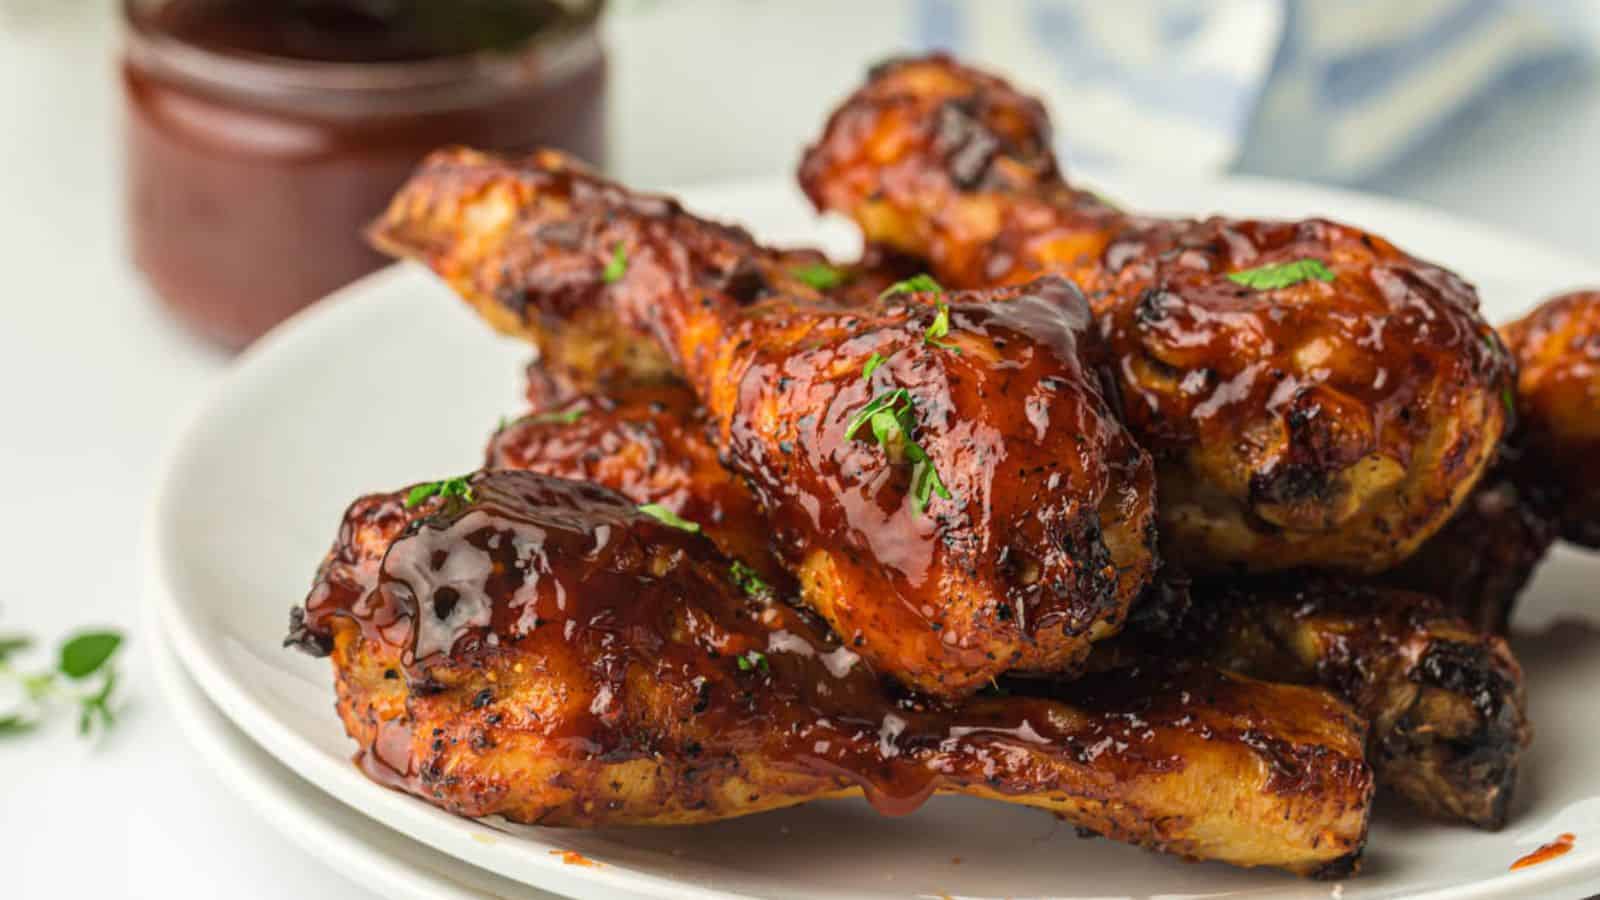 Glazed barbecued chicken drumsticks on a white plate.